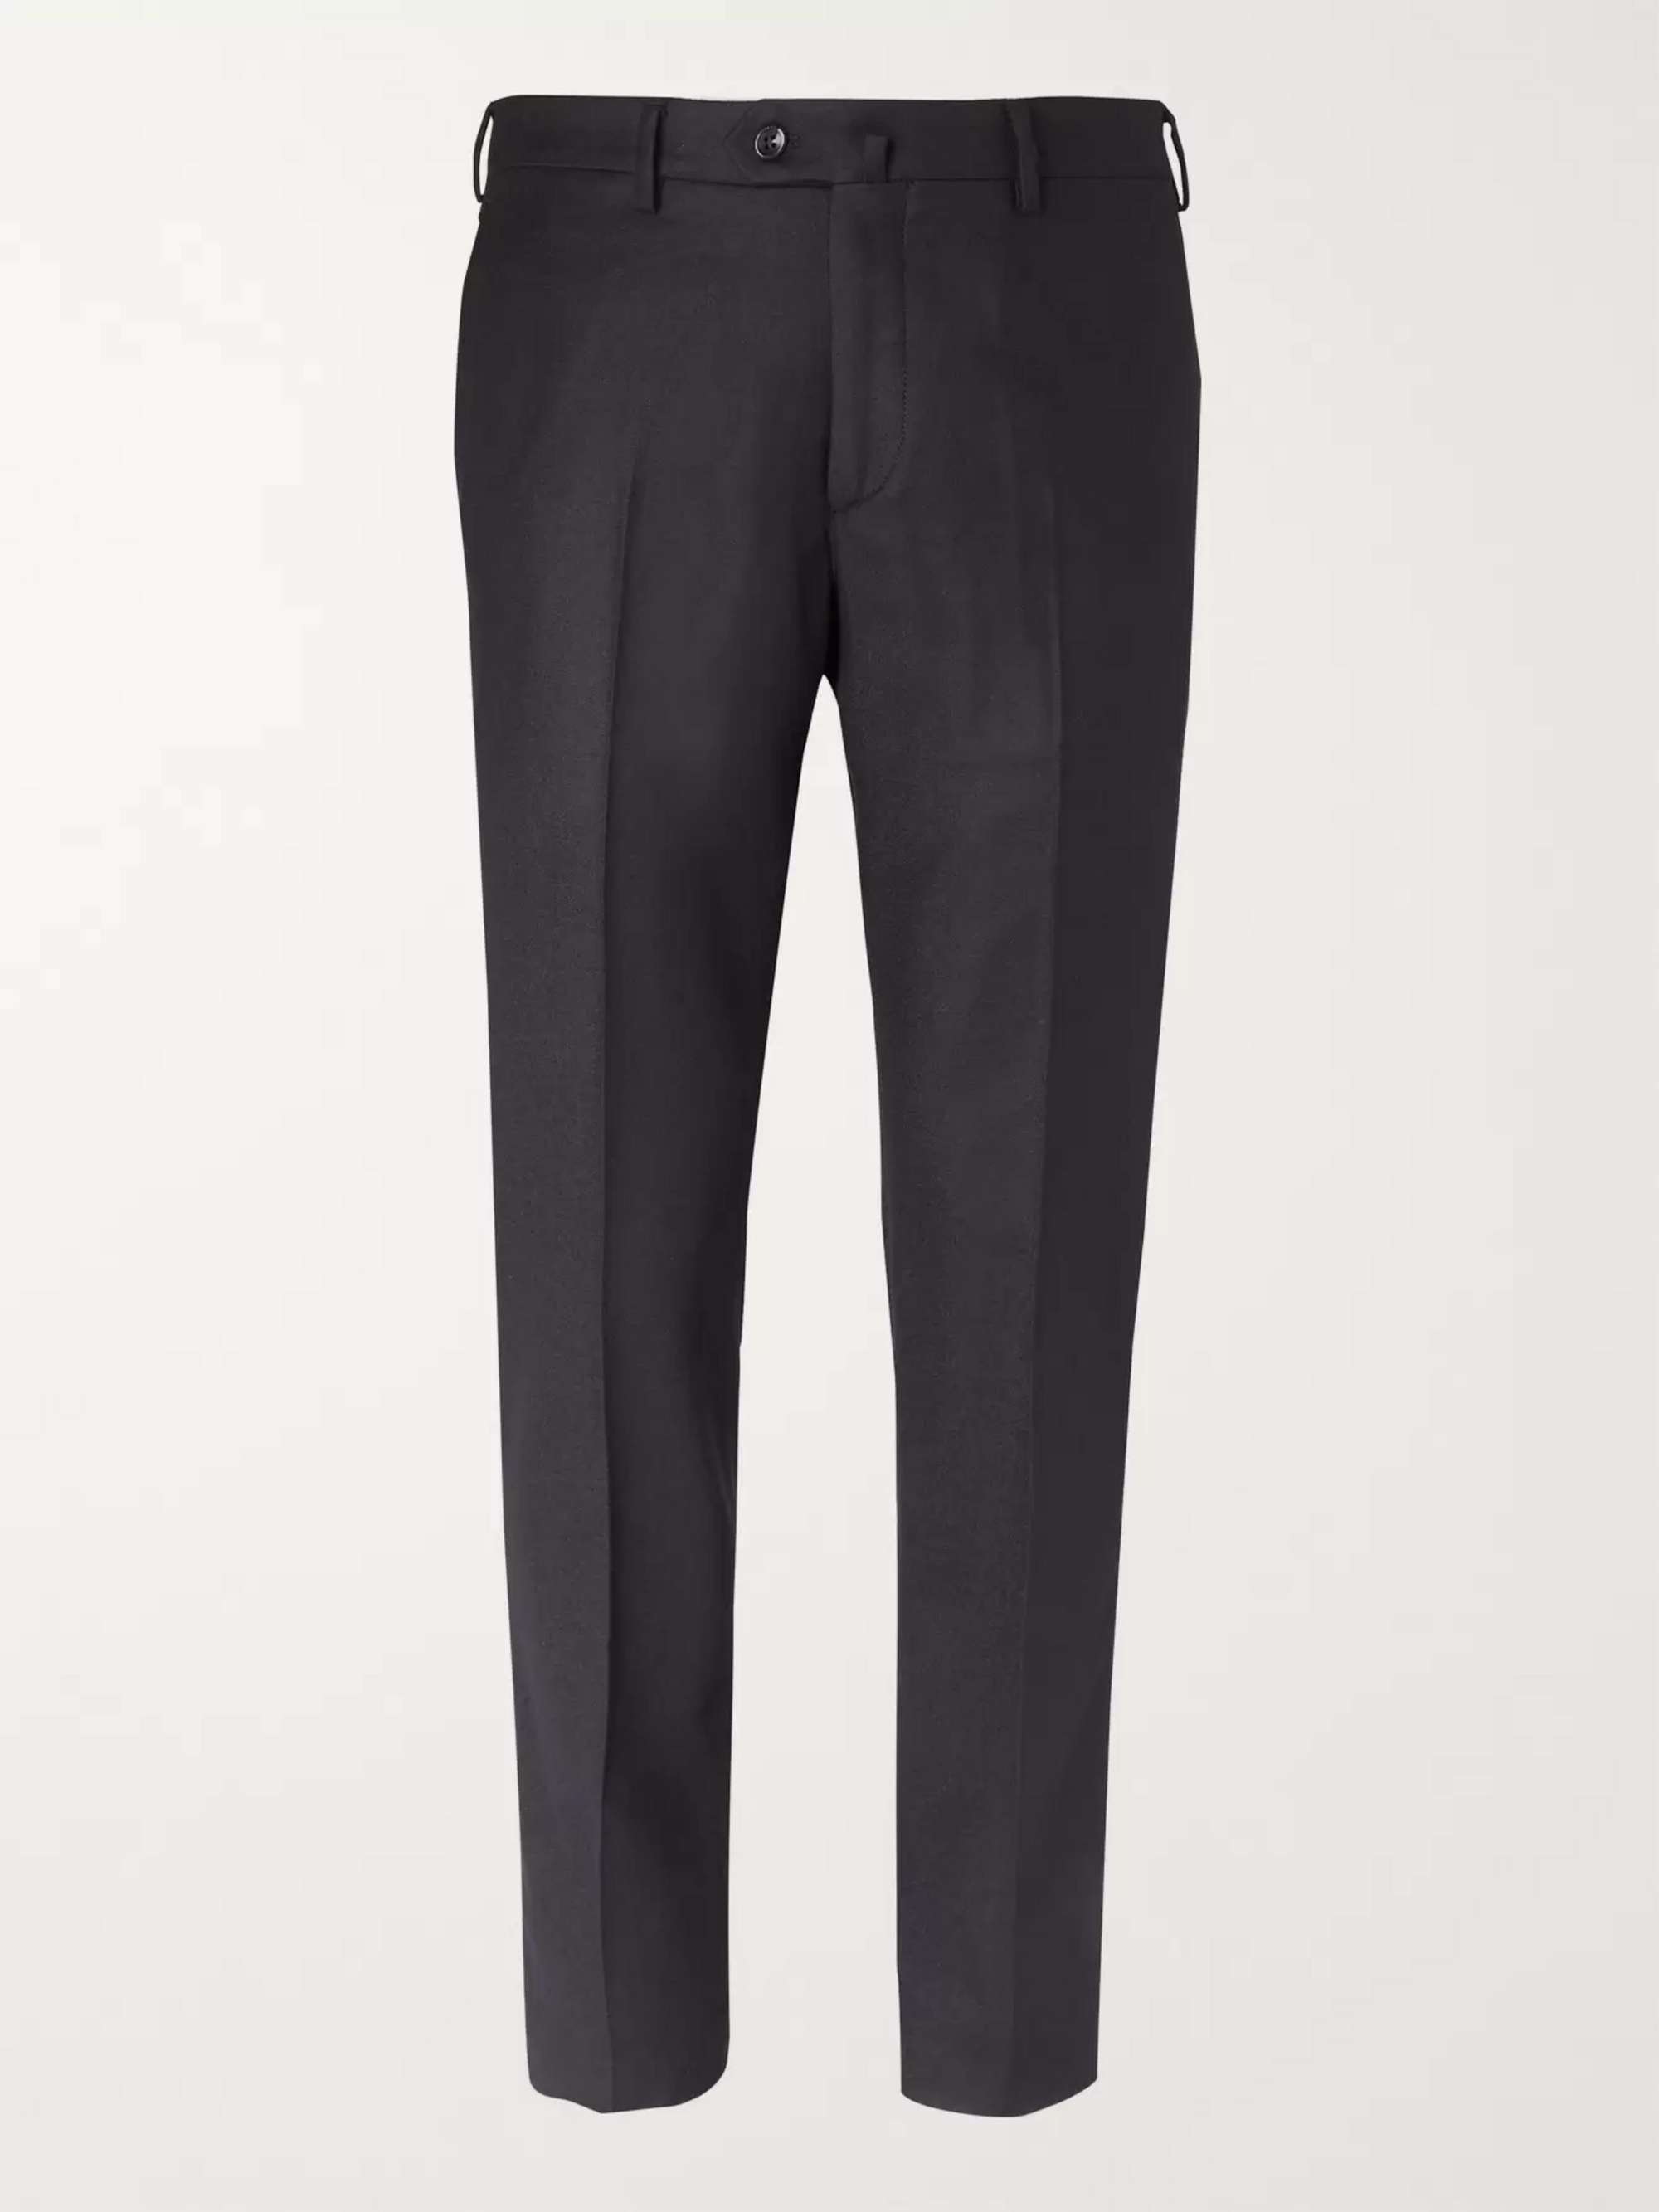 LORO PIANA Slim-Fit Wool and Cashmere-Blend Trousers for Men | MR PORTER